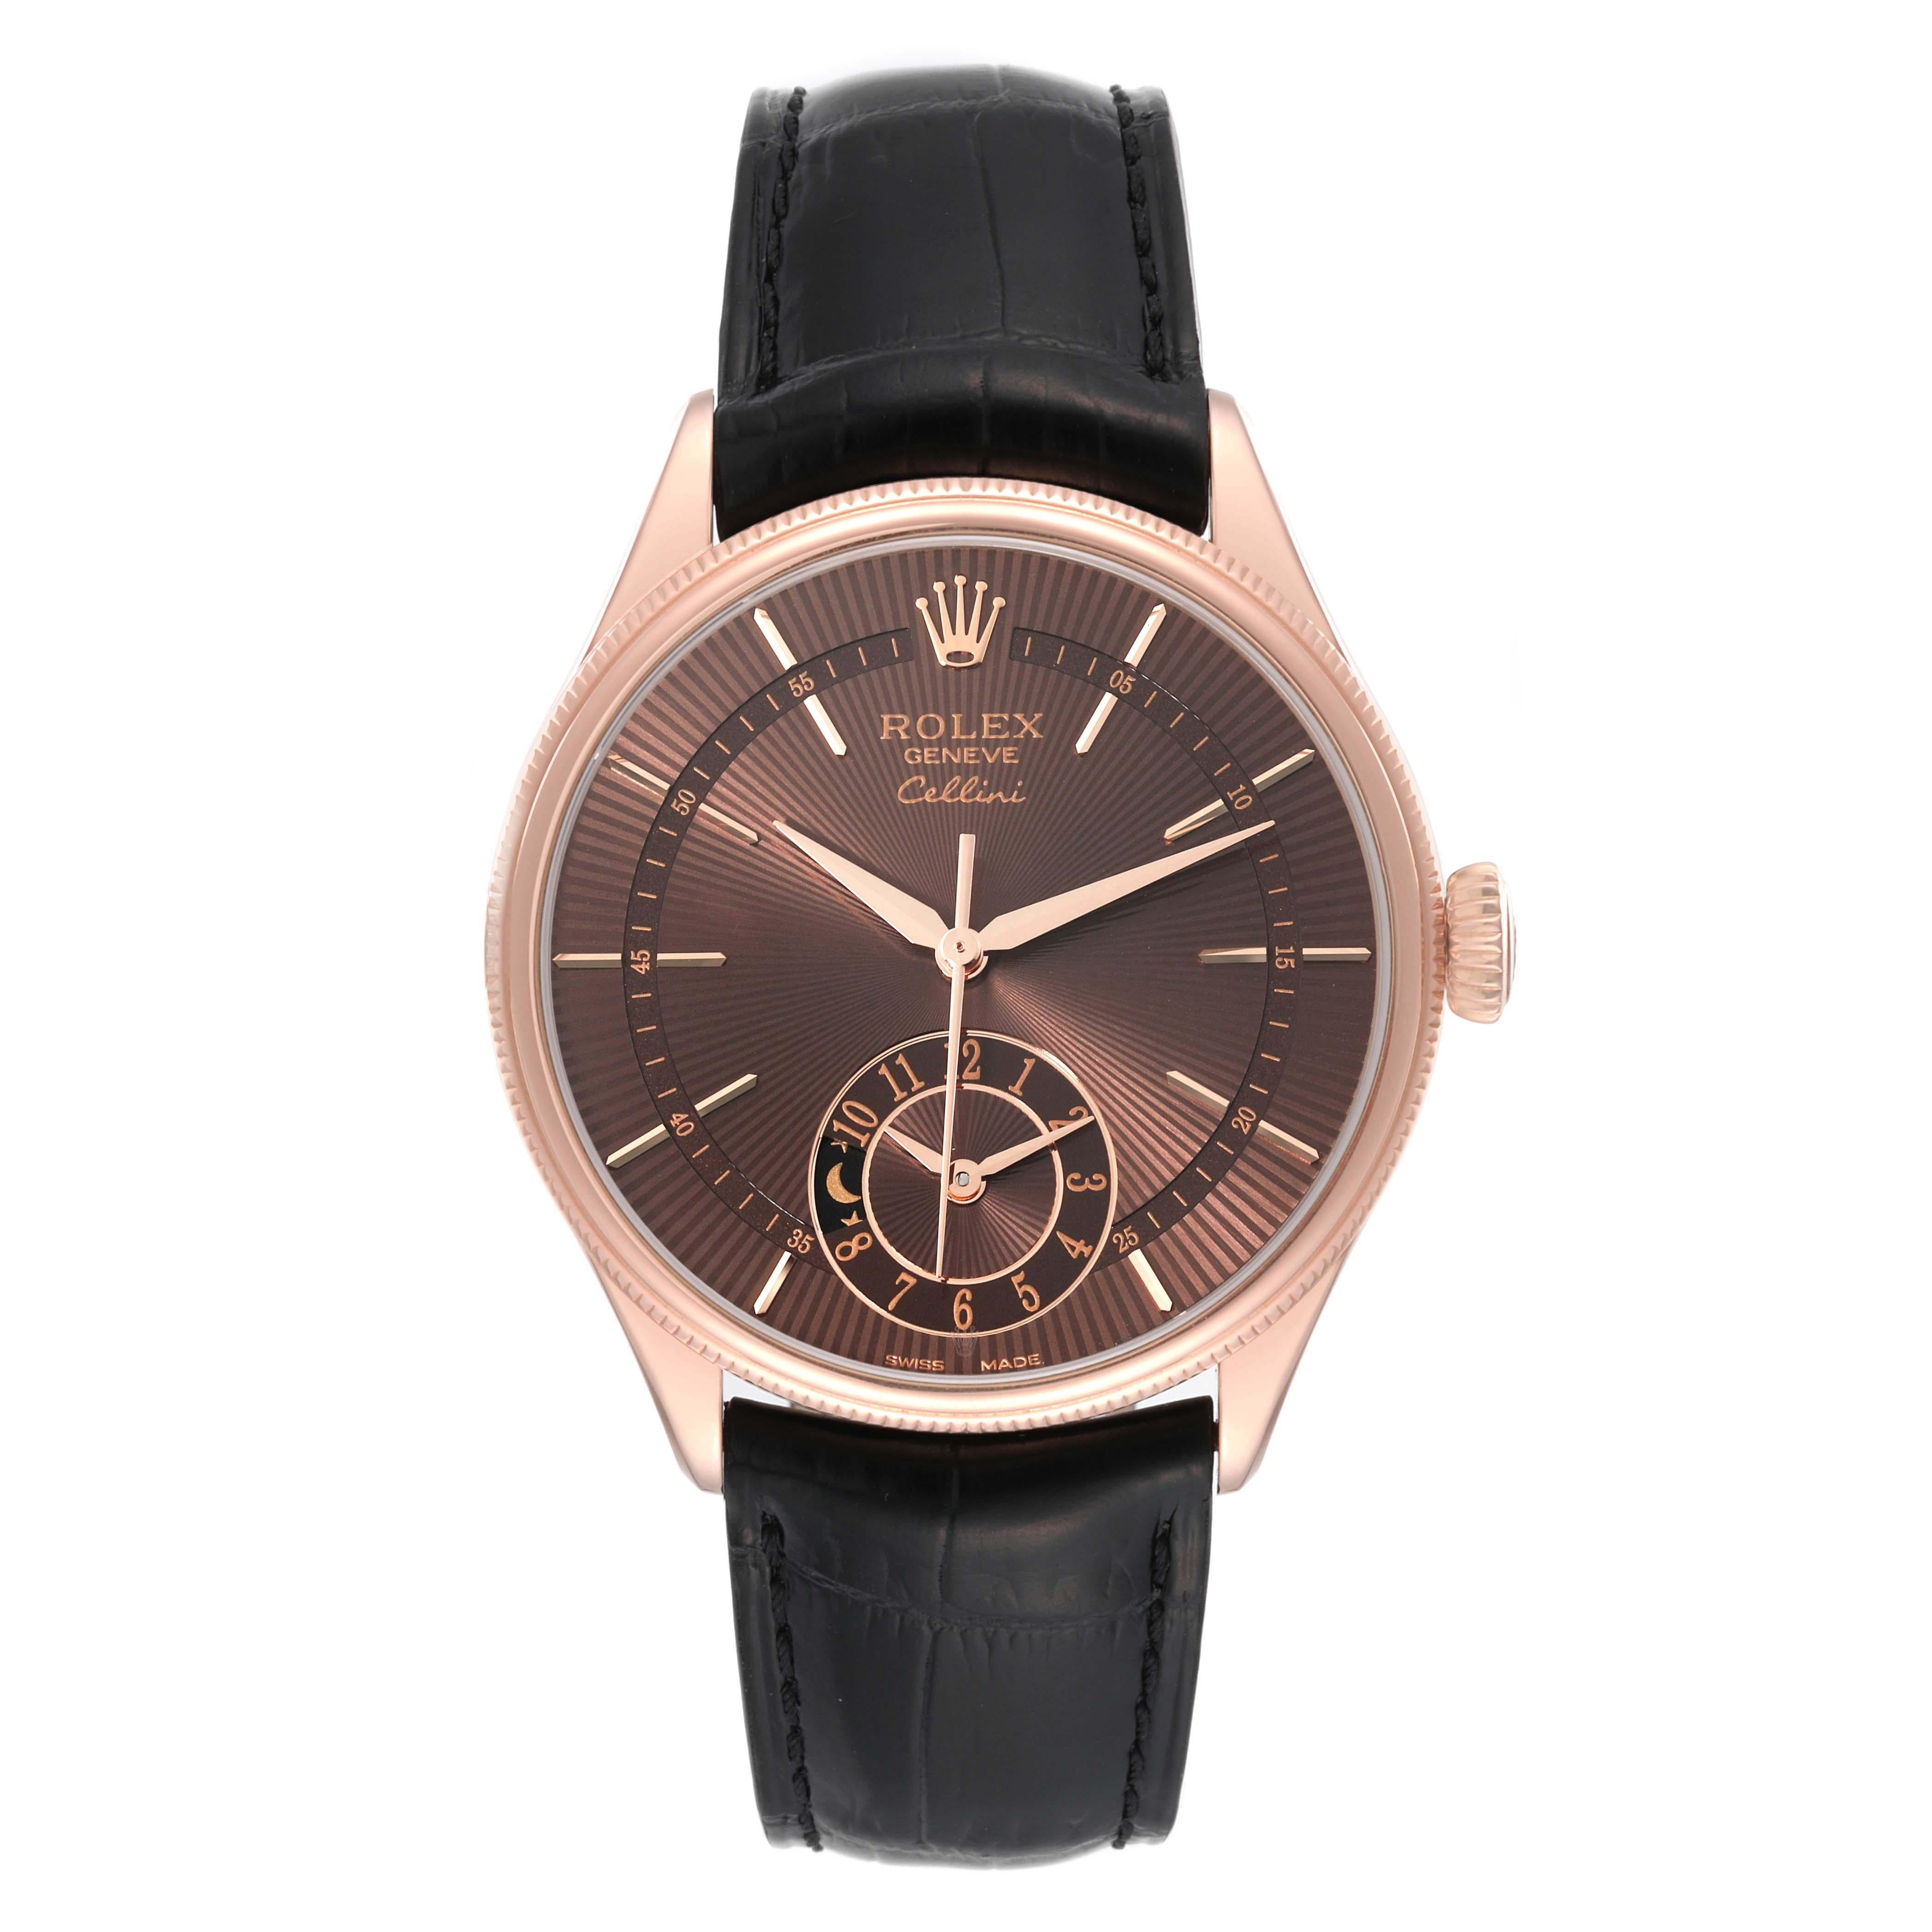 Rolex Cellini Dual Time Brown Dial Rose Gold Automatic Mens Watch 50525. Automatic self-winding movement. Officially certified Swiss chronometer (COSC). Paramagnetic blue Parachrom hairspring. Bidirectional self-winding via Perpetual rotor. 18K rose